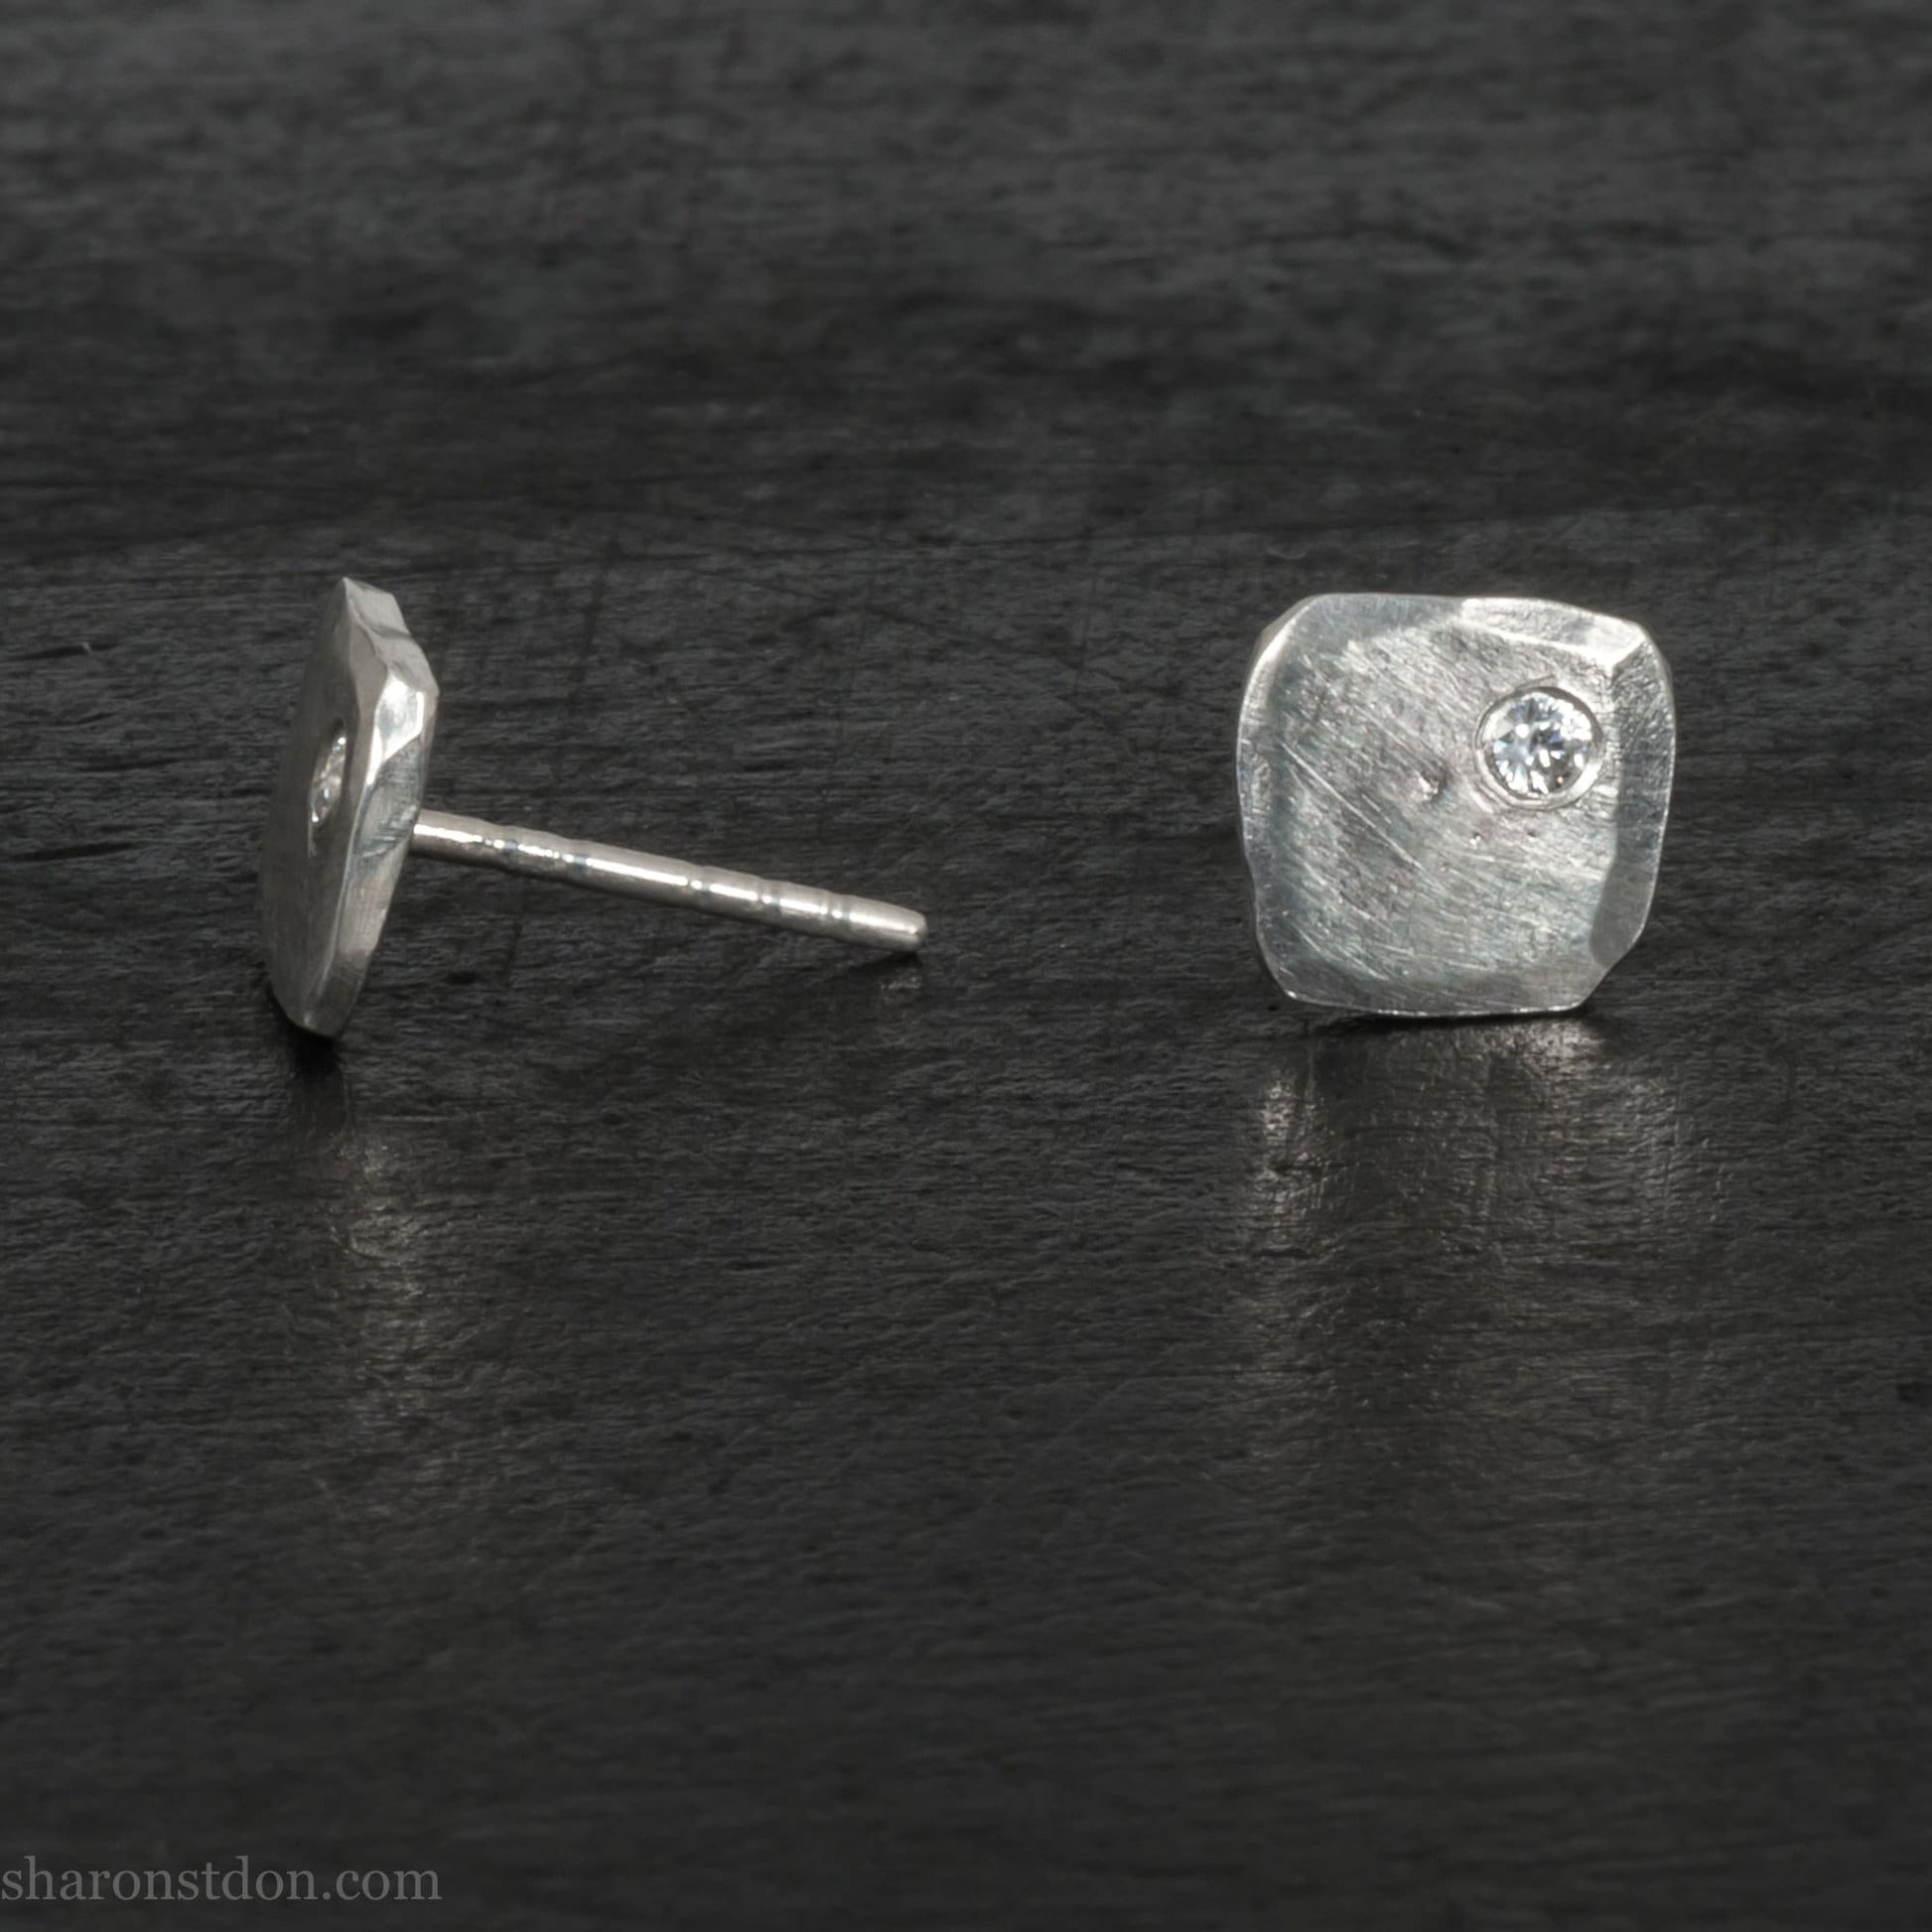 Handmade 925 sterling silver stud earrings with imitation diamond gemstones. Small square stud earrings made by Sharon SaintDon in North America.